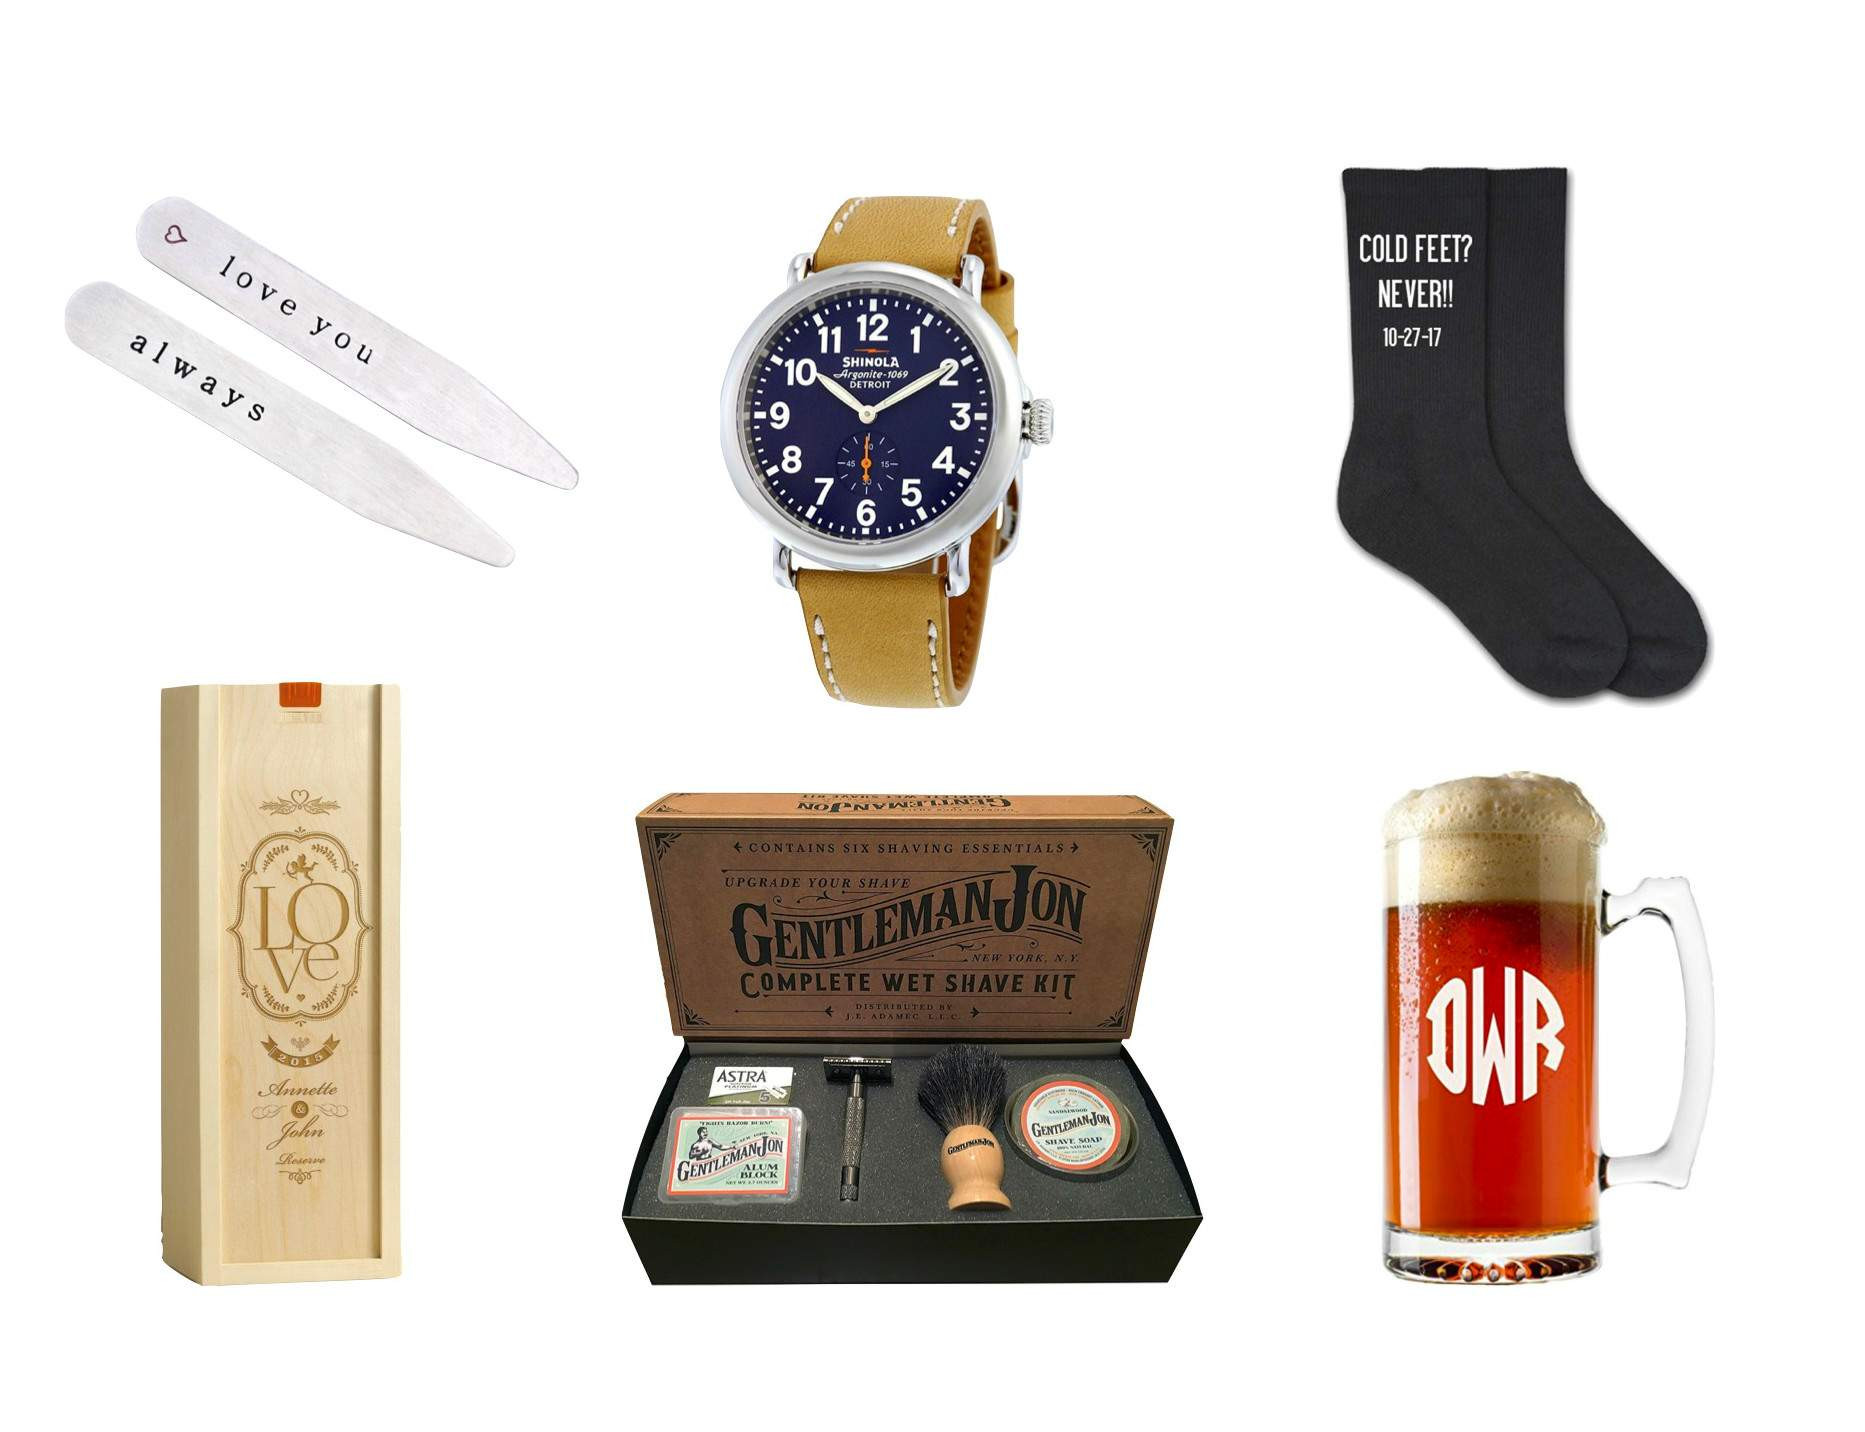 Wedding Gift Ideas For Groom From Bride
 Best Wedding Day Gift Ideas From the Bride to the Groom